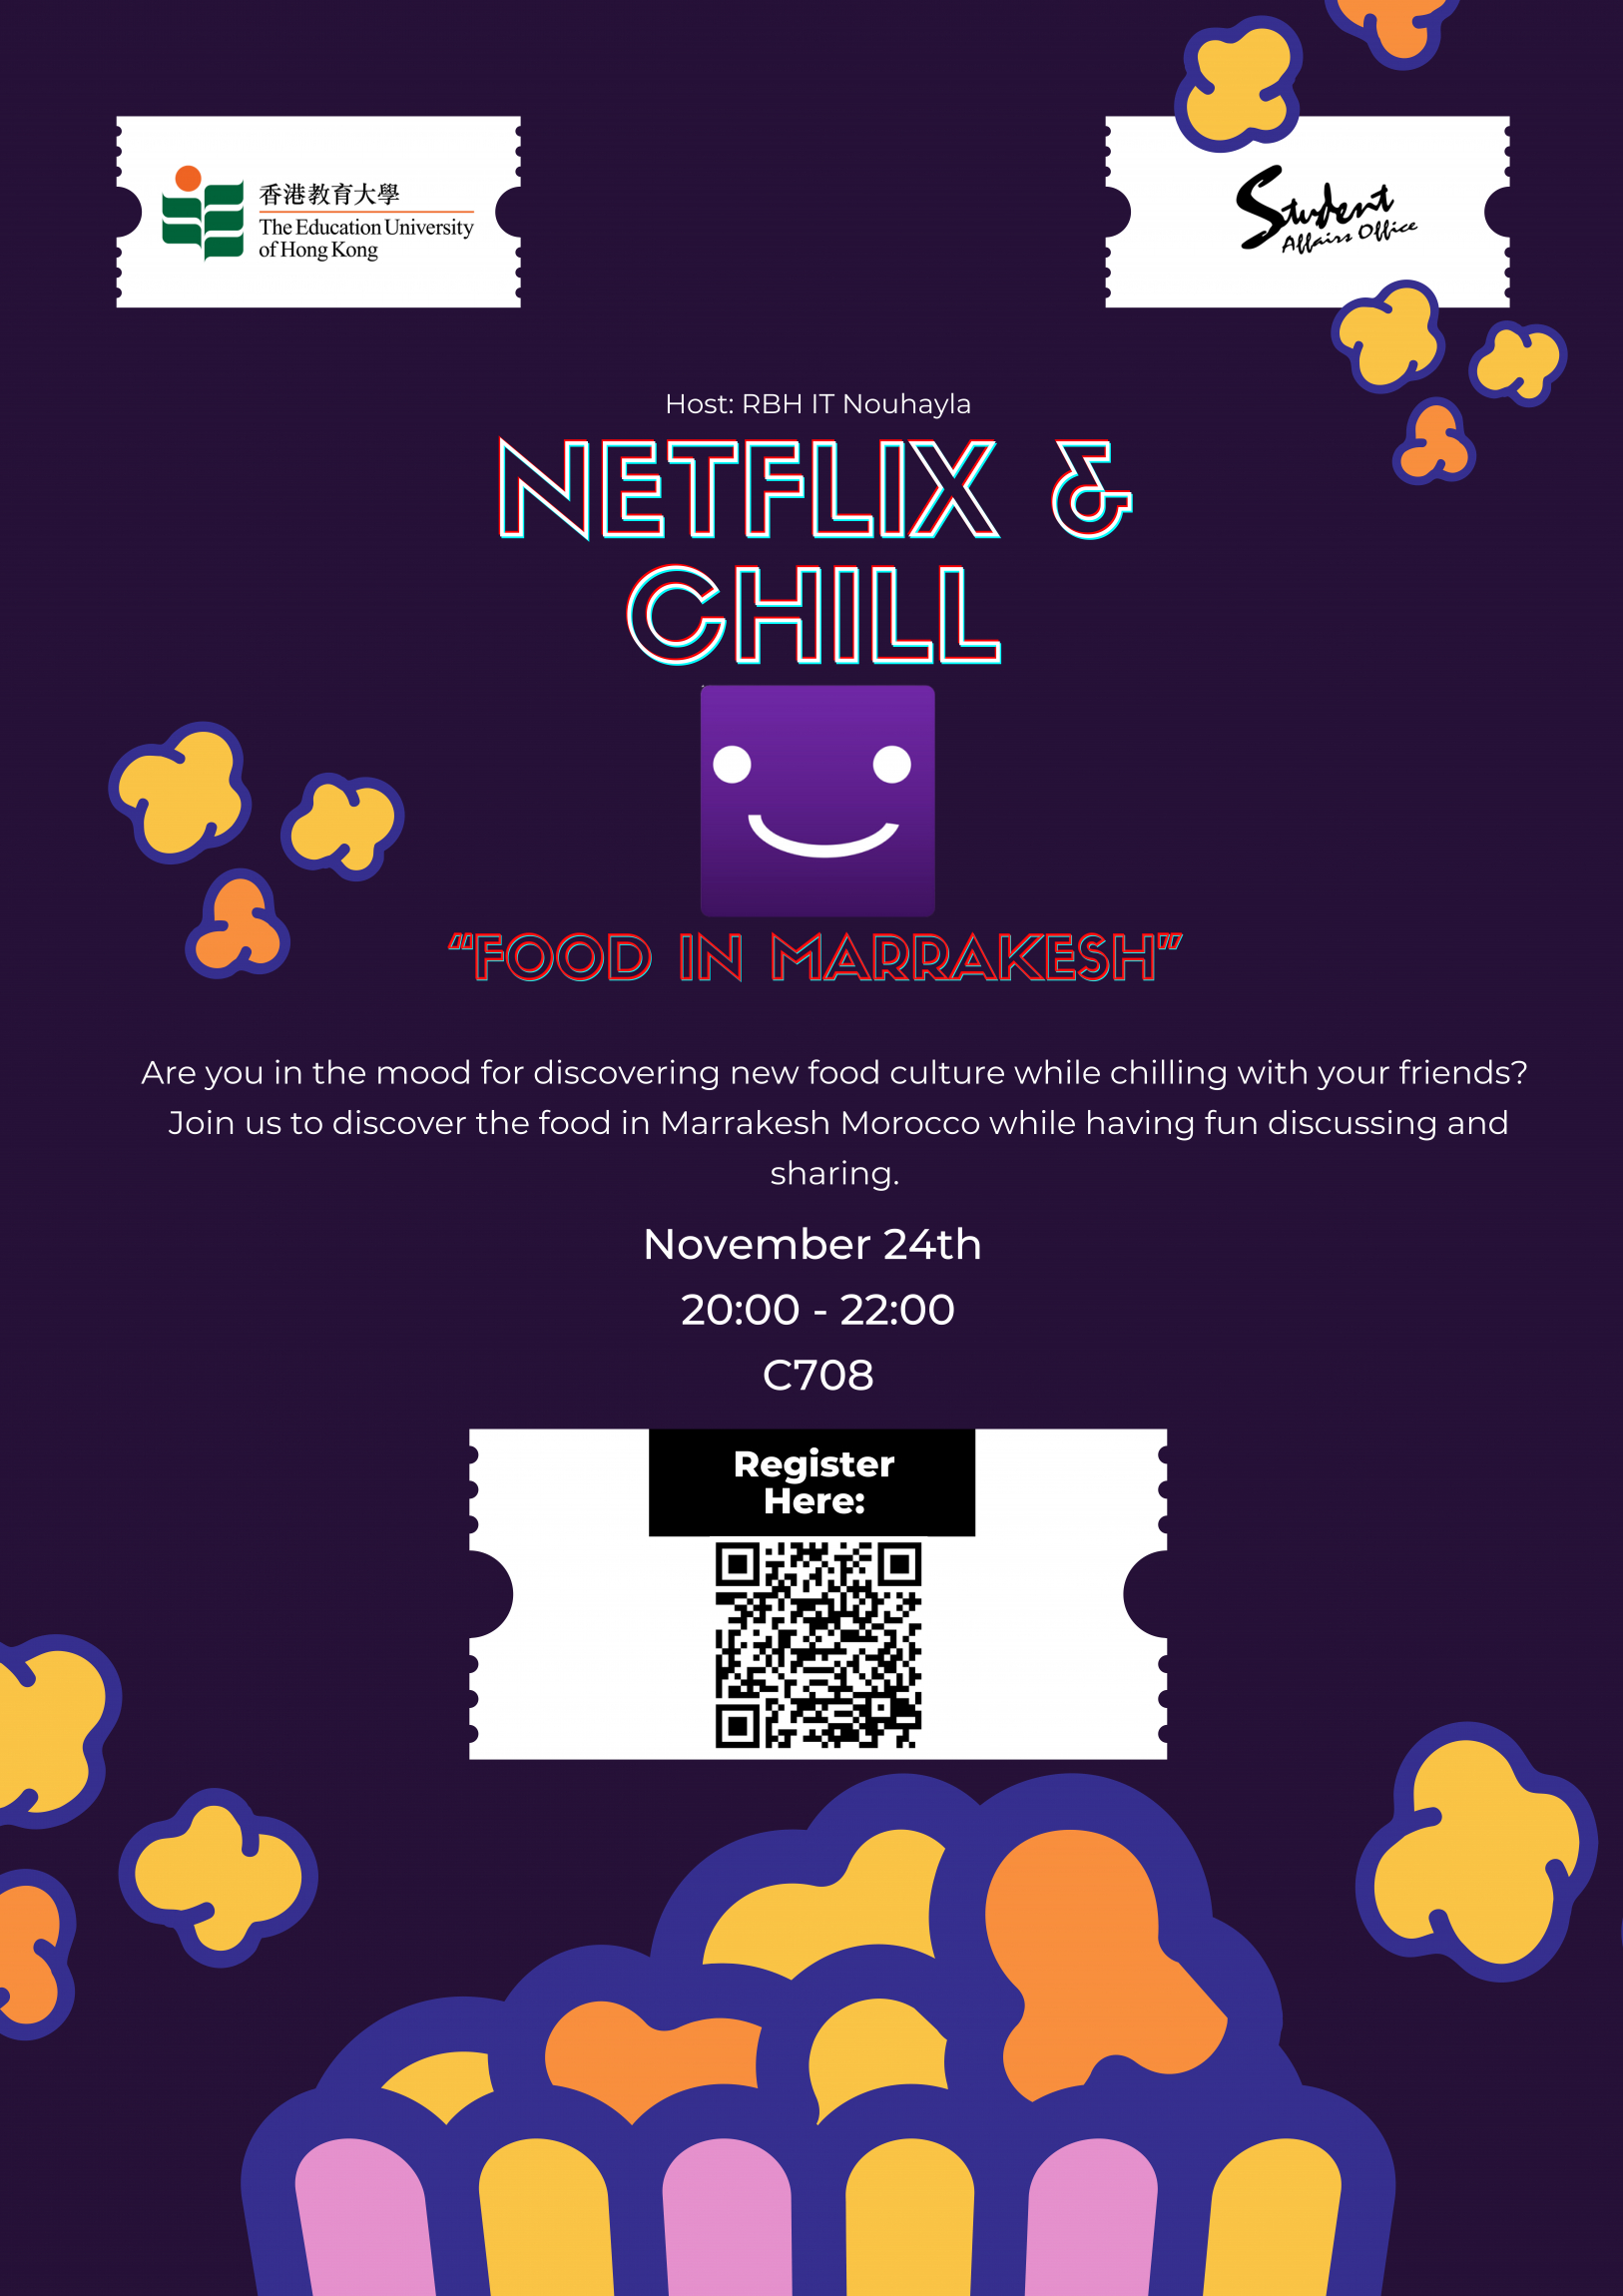 Self Photos / Files - Nouhayla_Netflix & Chill “Food in Marrakesh”_Poster_1 